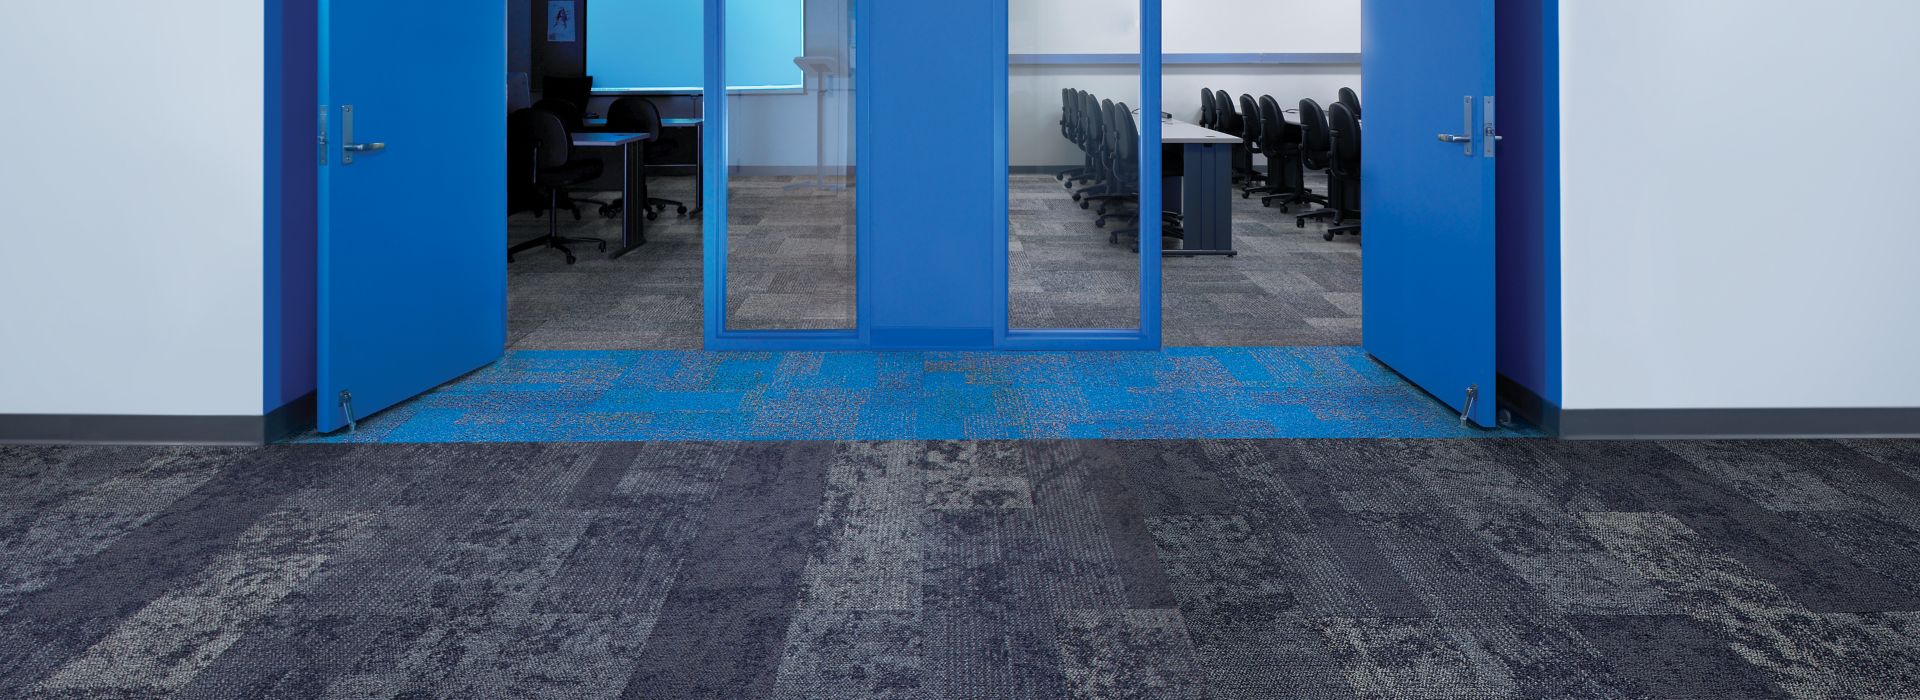 Interface Nimbus carpet tile plank, Cubic and Cubic Colours carpet tile in corridor entryway to classroom with blue doors